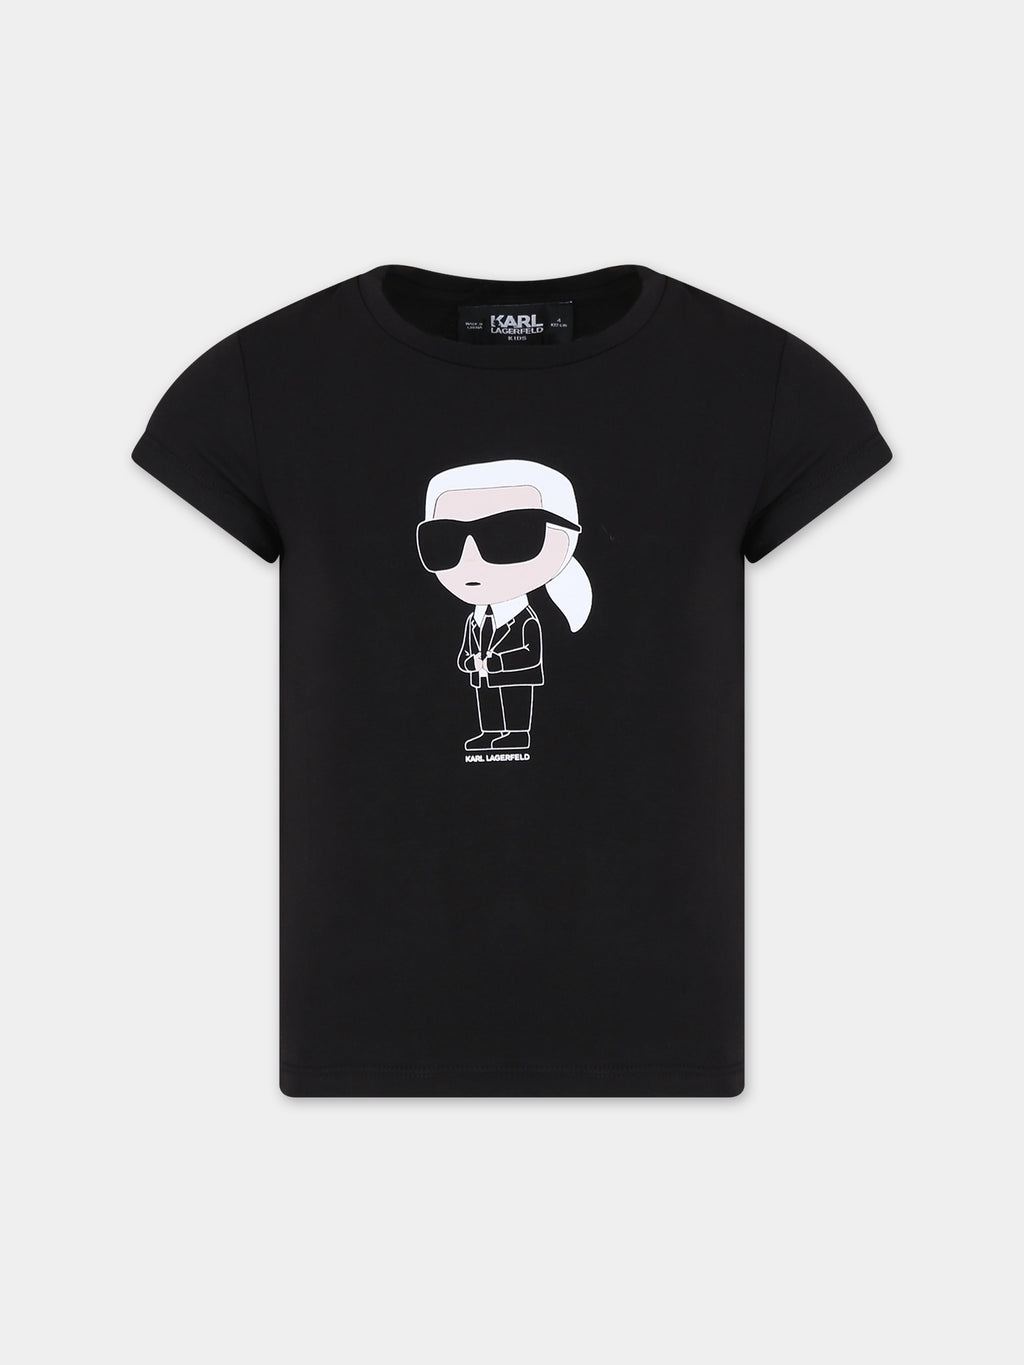 Black t-shirt for girl with Karl Lagerfeld print and logo